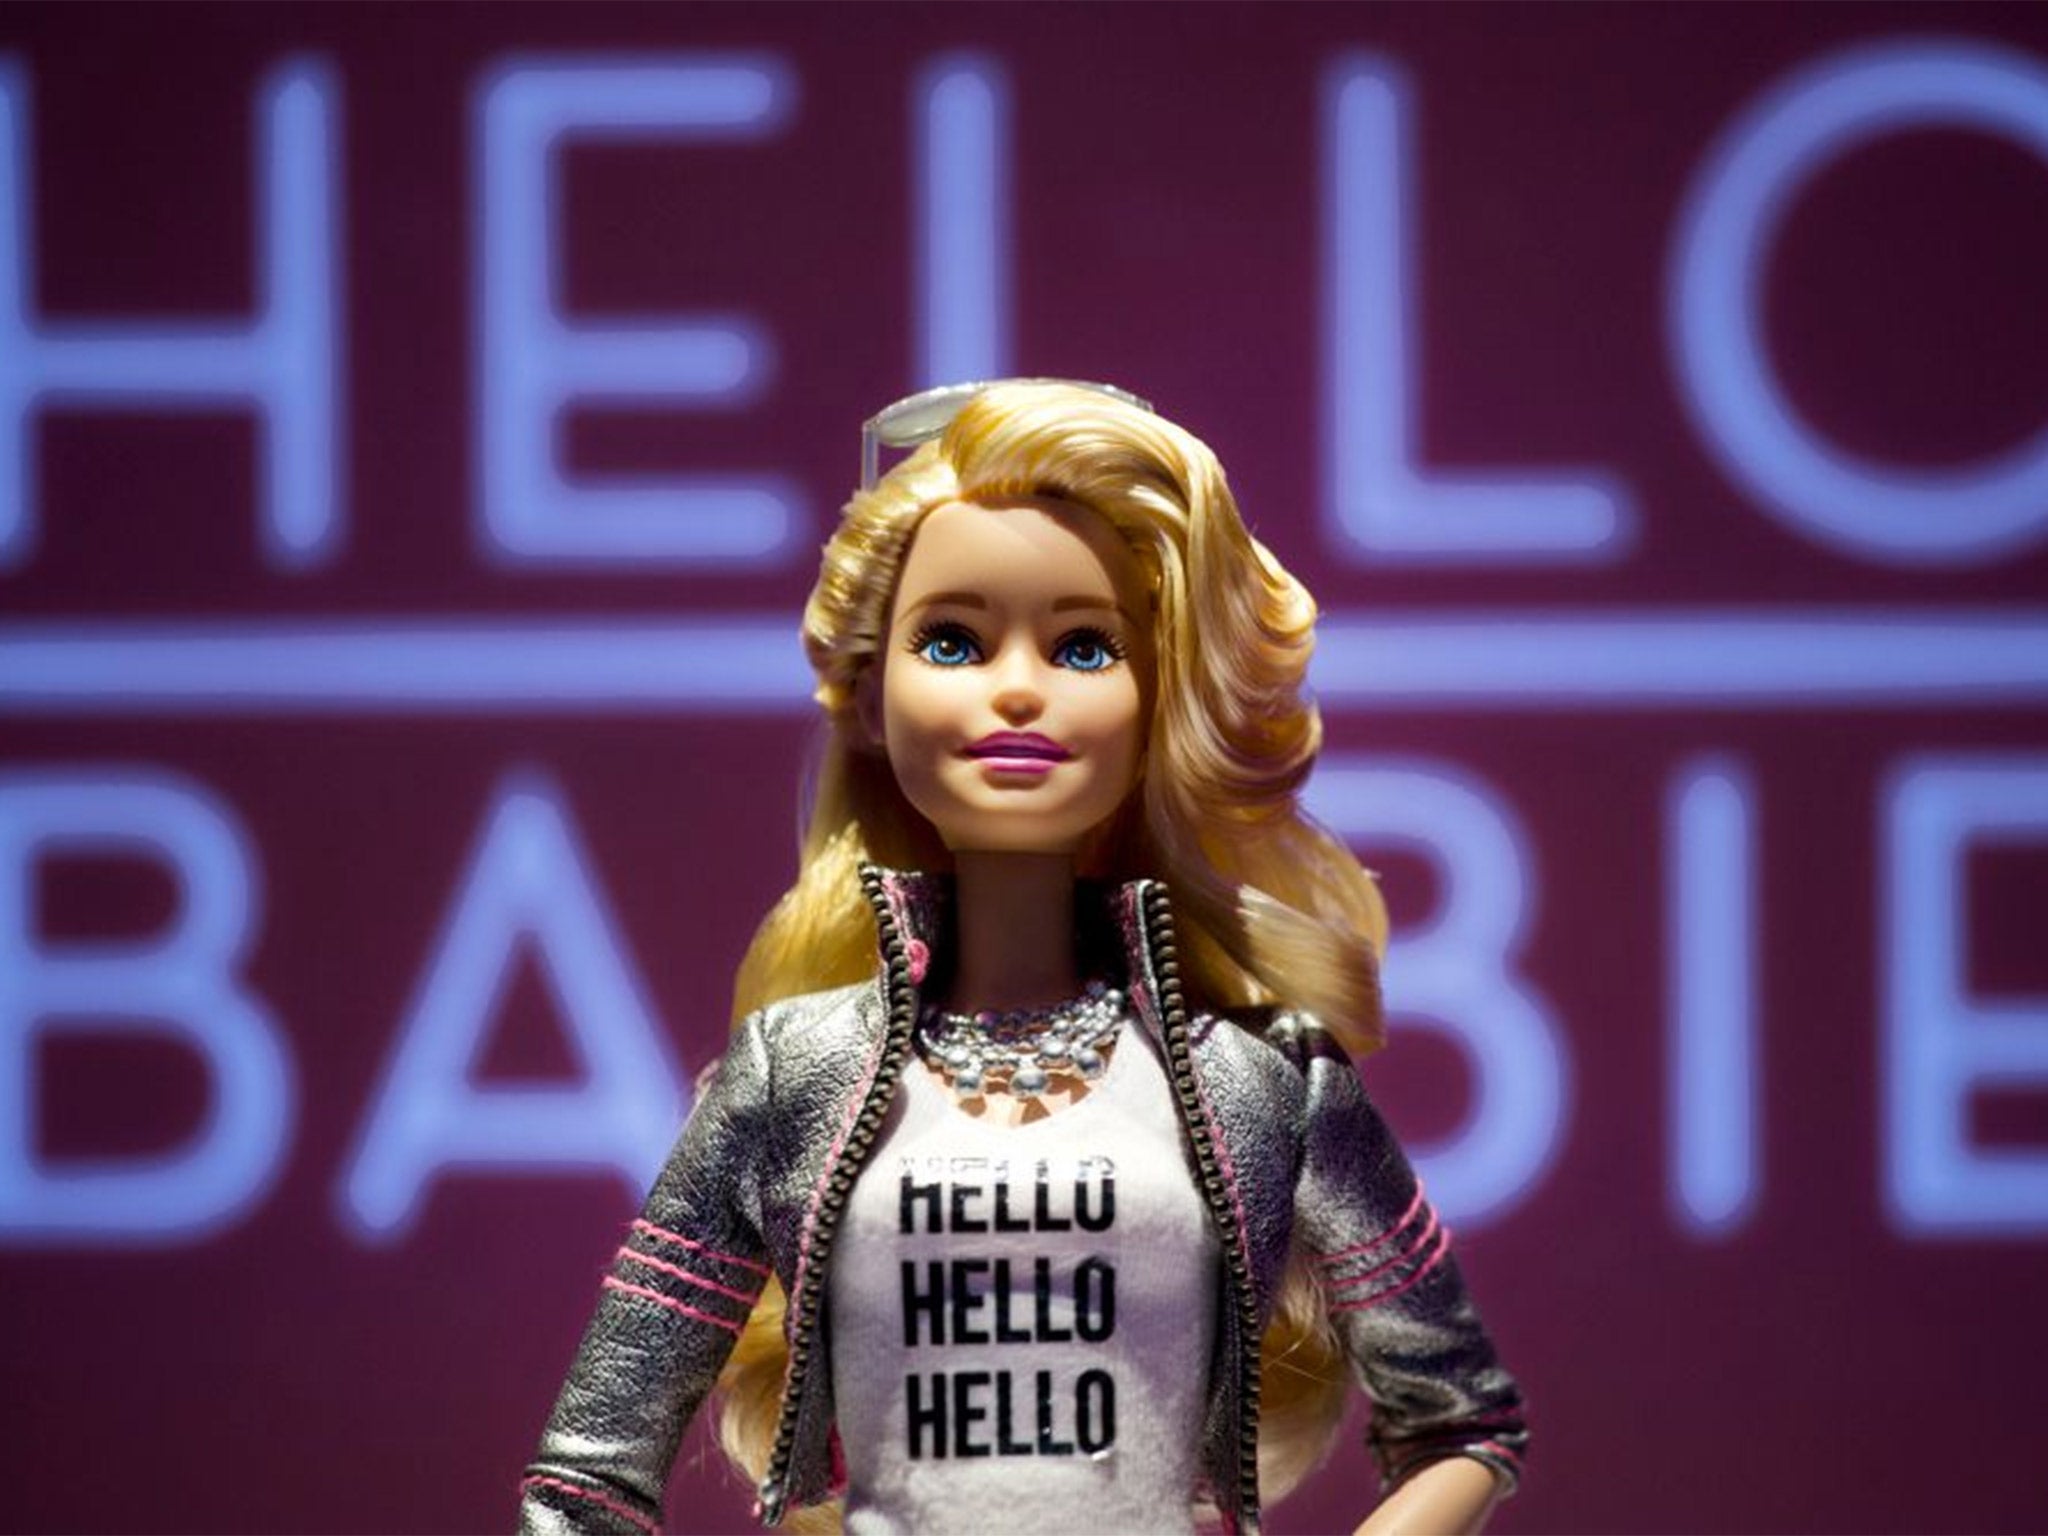 Living dolls: Hello Barbie is purportedly able understand conversations